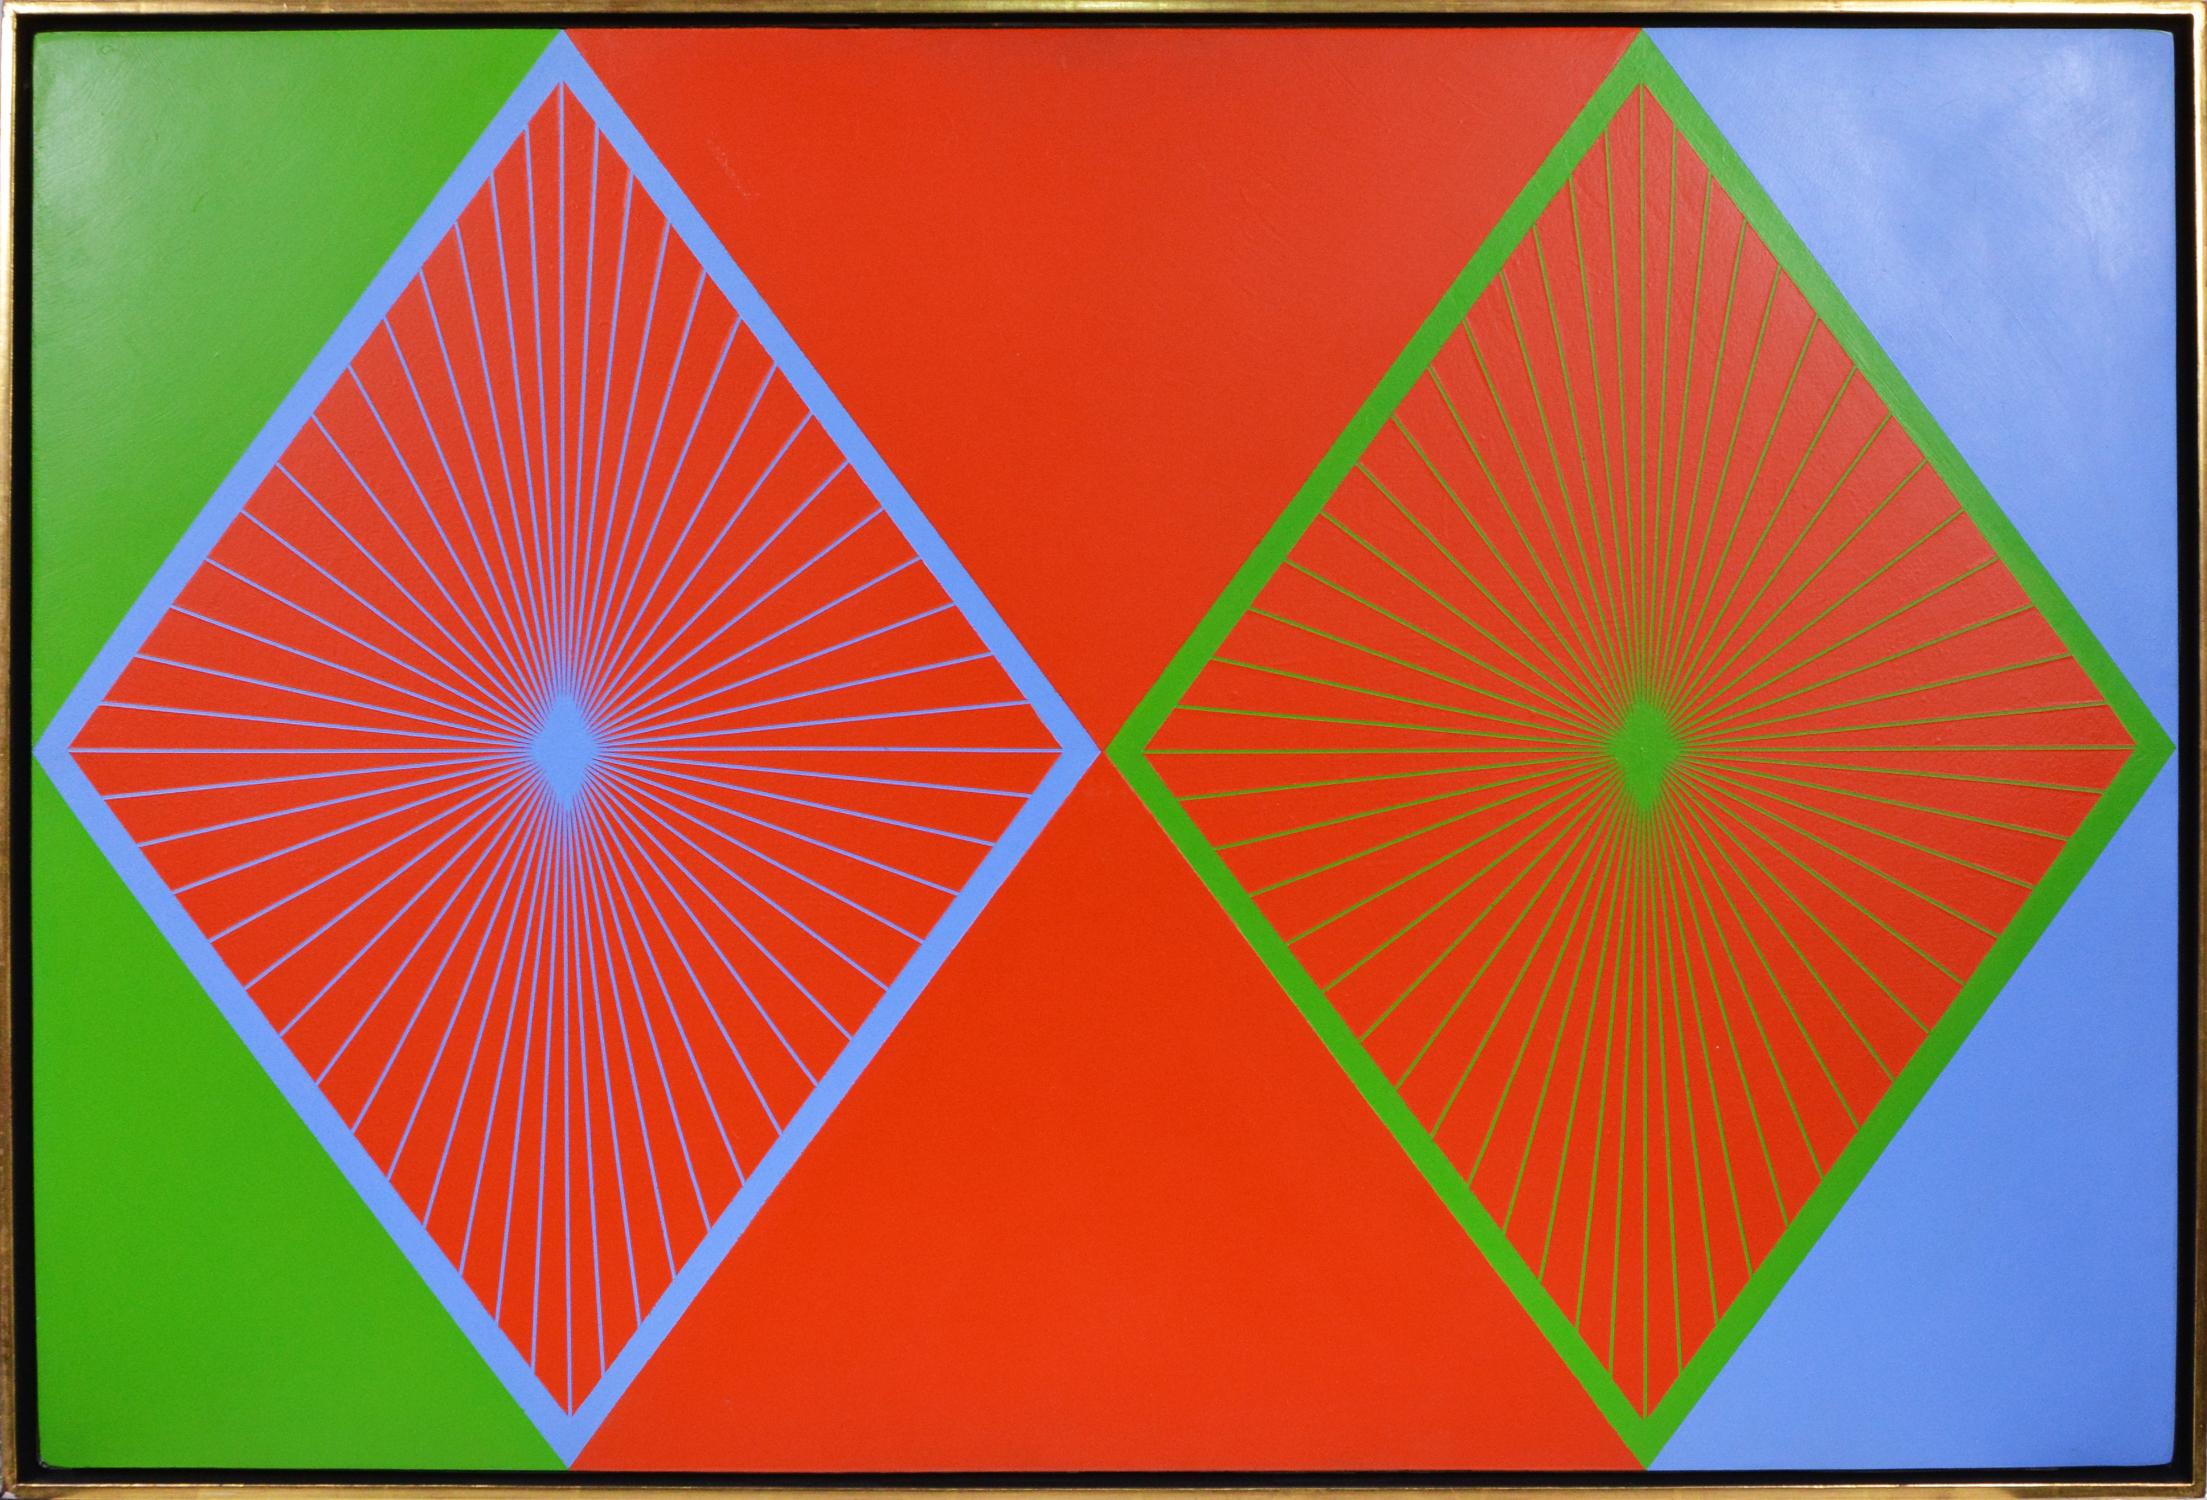 Richard Anuszkiewicz, Of the Same Brilliance, painting on board, 1964